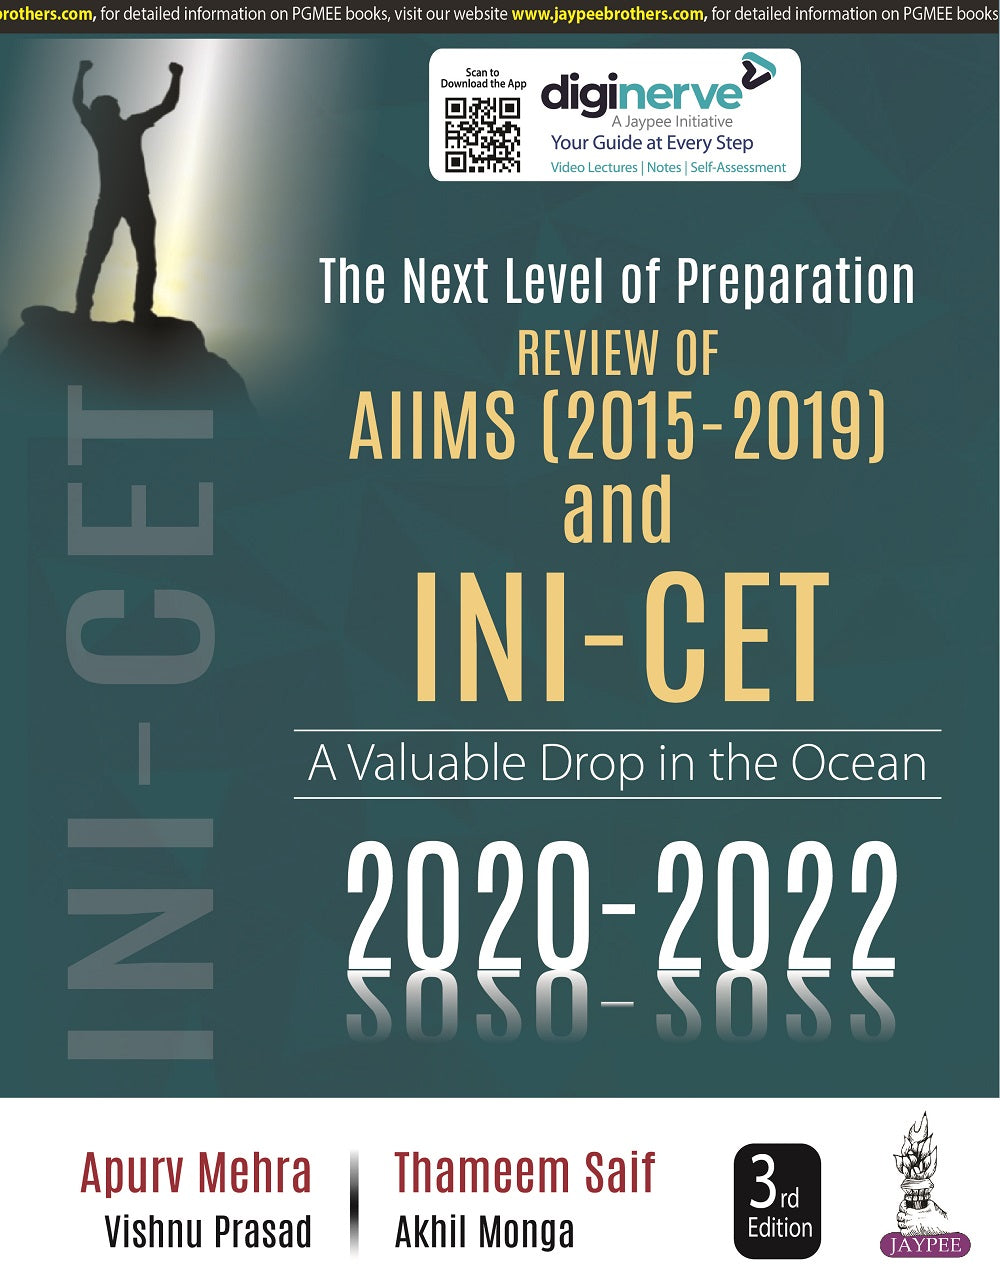 The Next Level of Preparation Review of AIIMS (2015-2019) and INI-CET (2020-2022) by Apurv Mehra